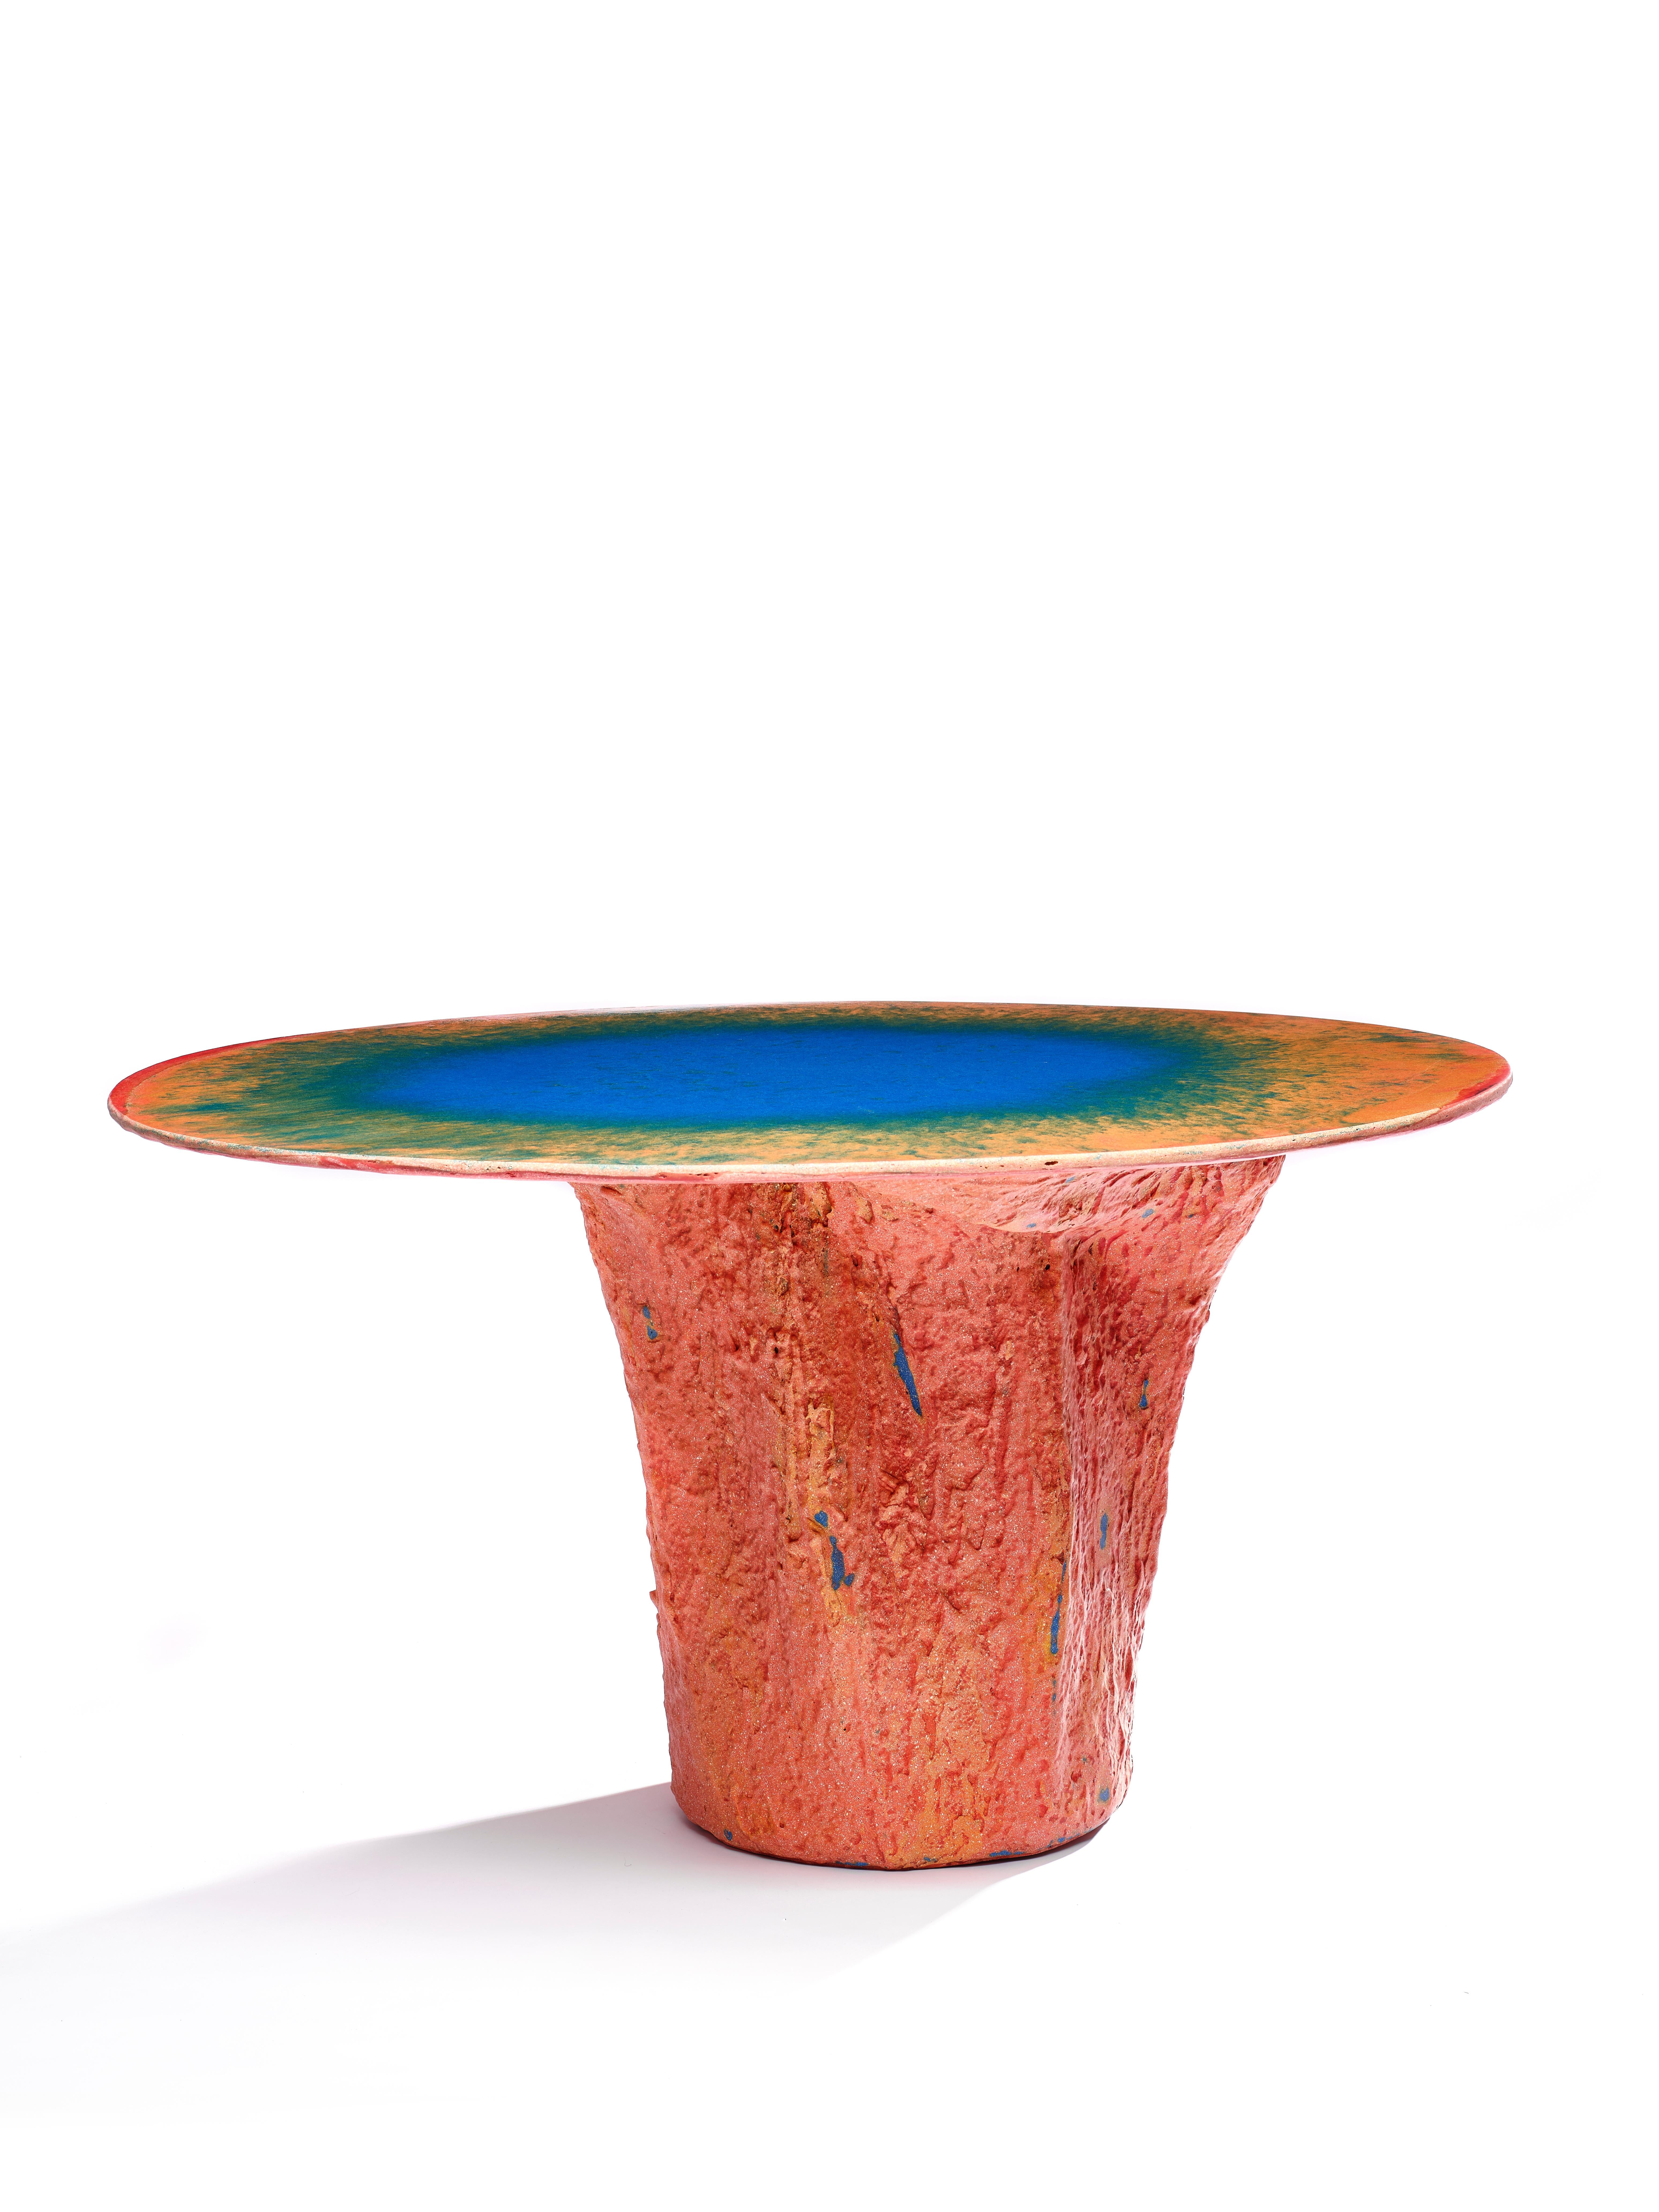 The blue in orange table from the Kernel series is a unique piece made entirely by hand by the designer. Completely built in Glebanite, a special blend of recycled and recyclable fiberglass. An artistic work of circular economy that takes care of